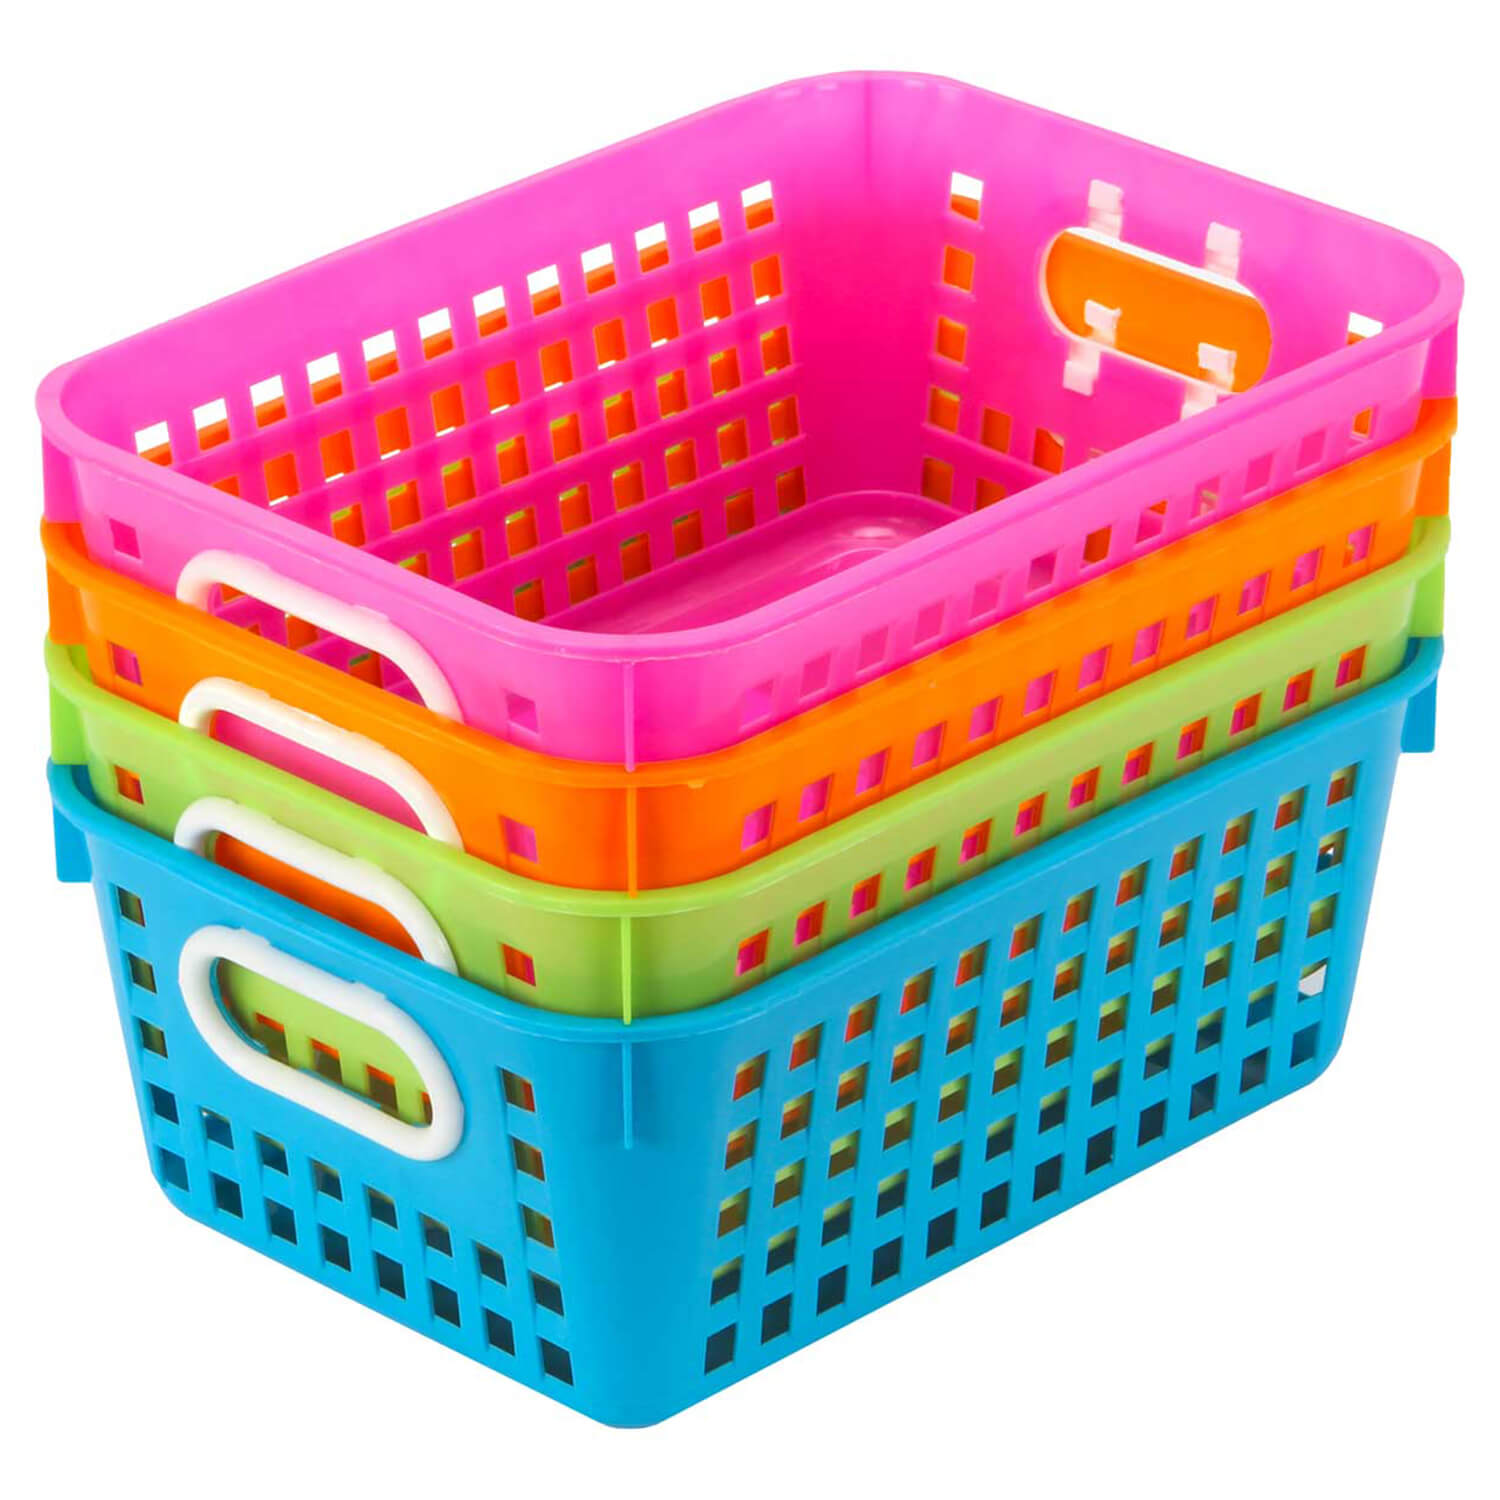 W13685669 Neon Tall Storage Baskets with Handles - 6 Pc.